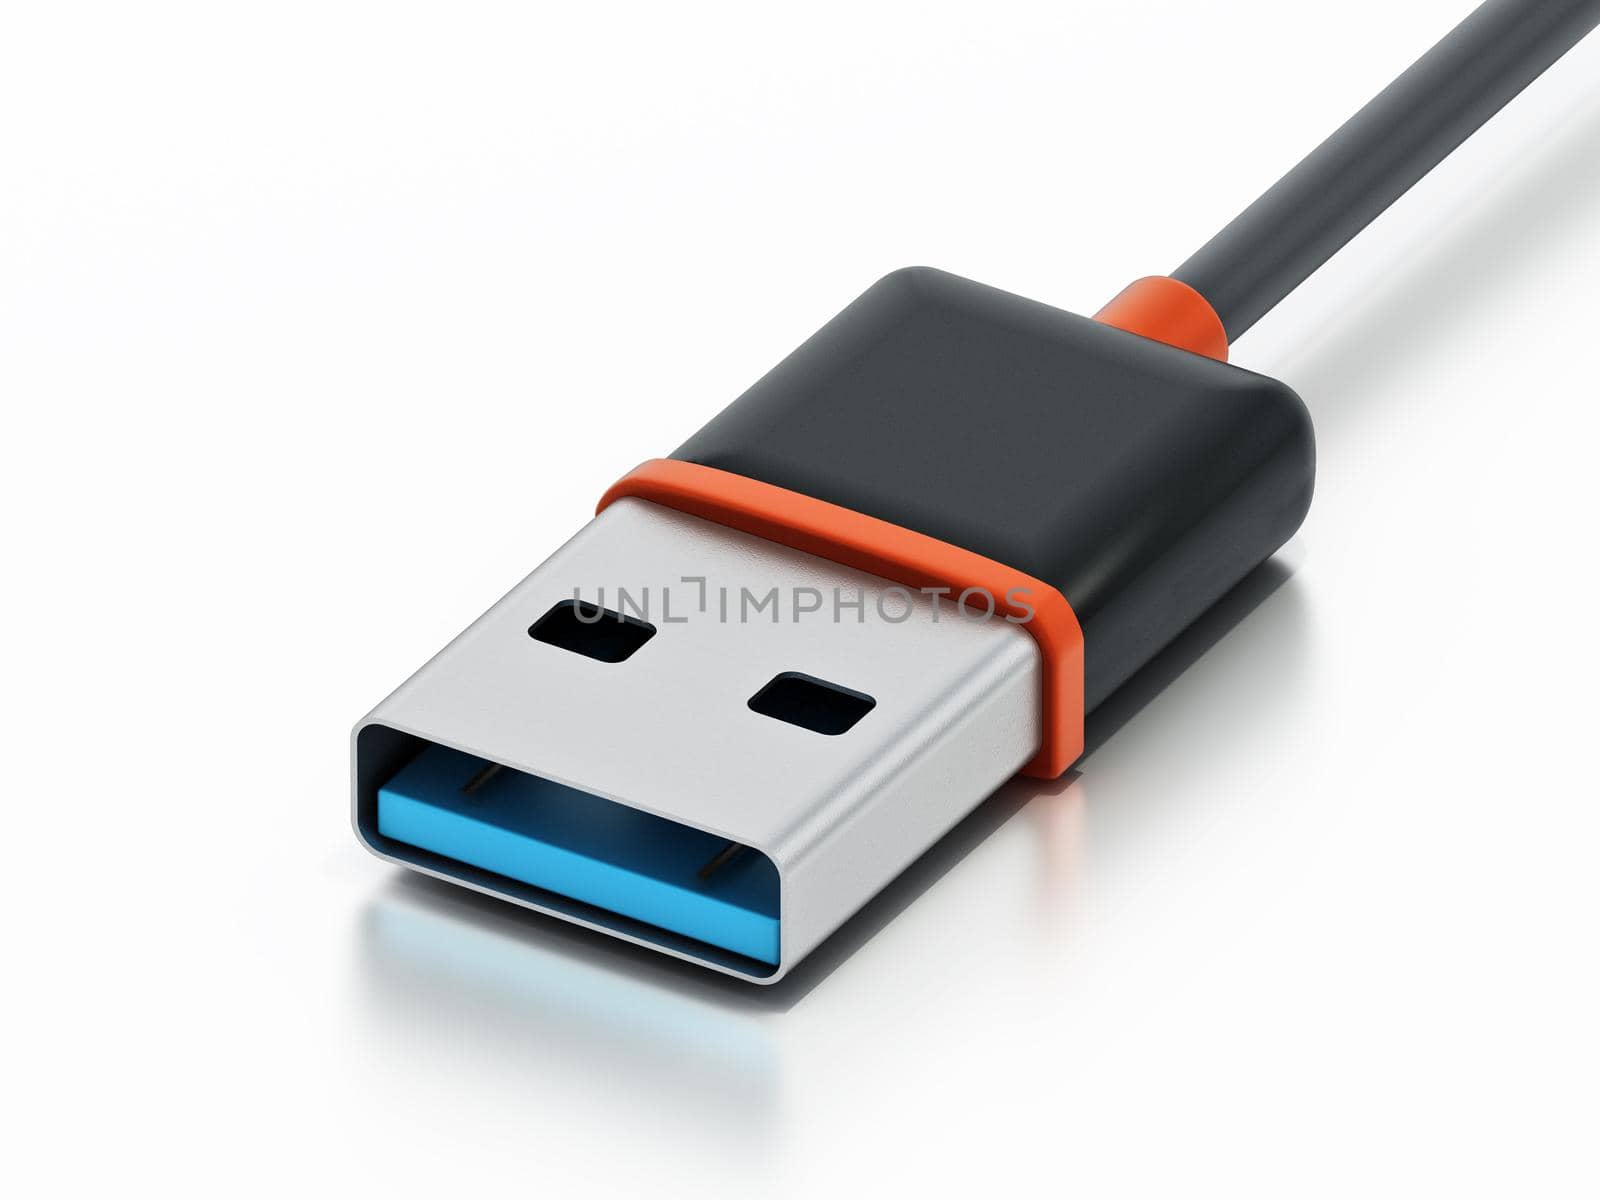 USB cable and plug isolated on white background. 3D illustration by Simsek